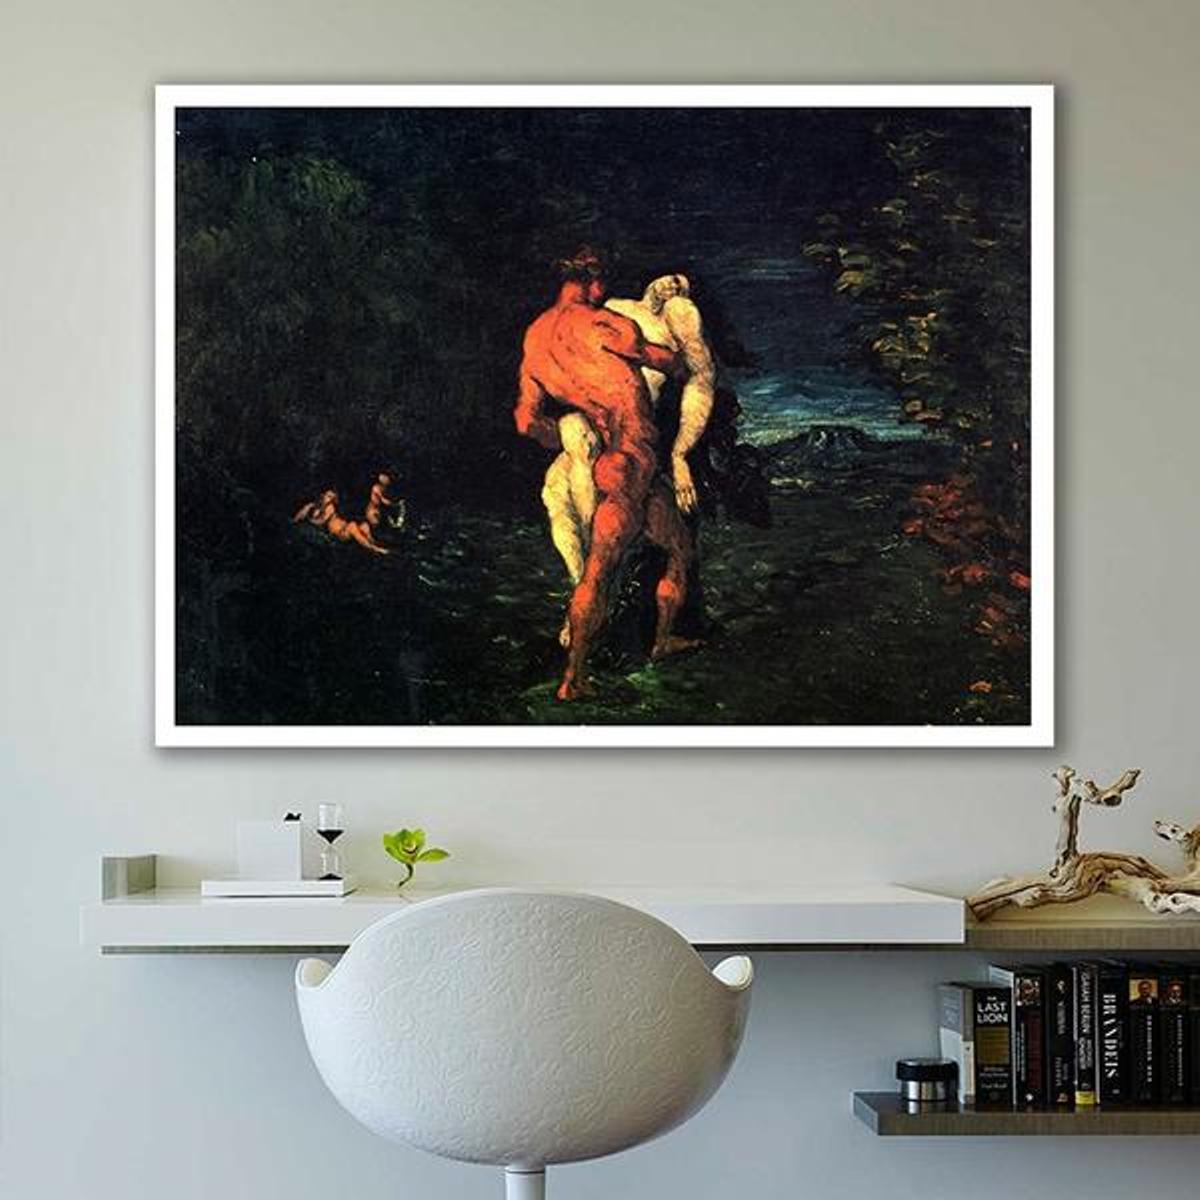 The Abduction by Paul Cezanne - Van-Go Paint-By-Number Kit